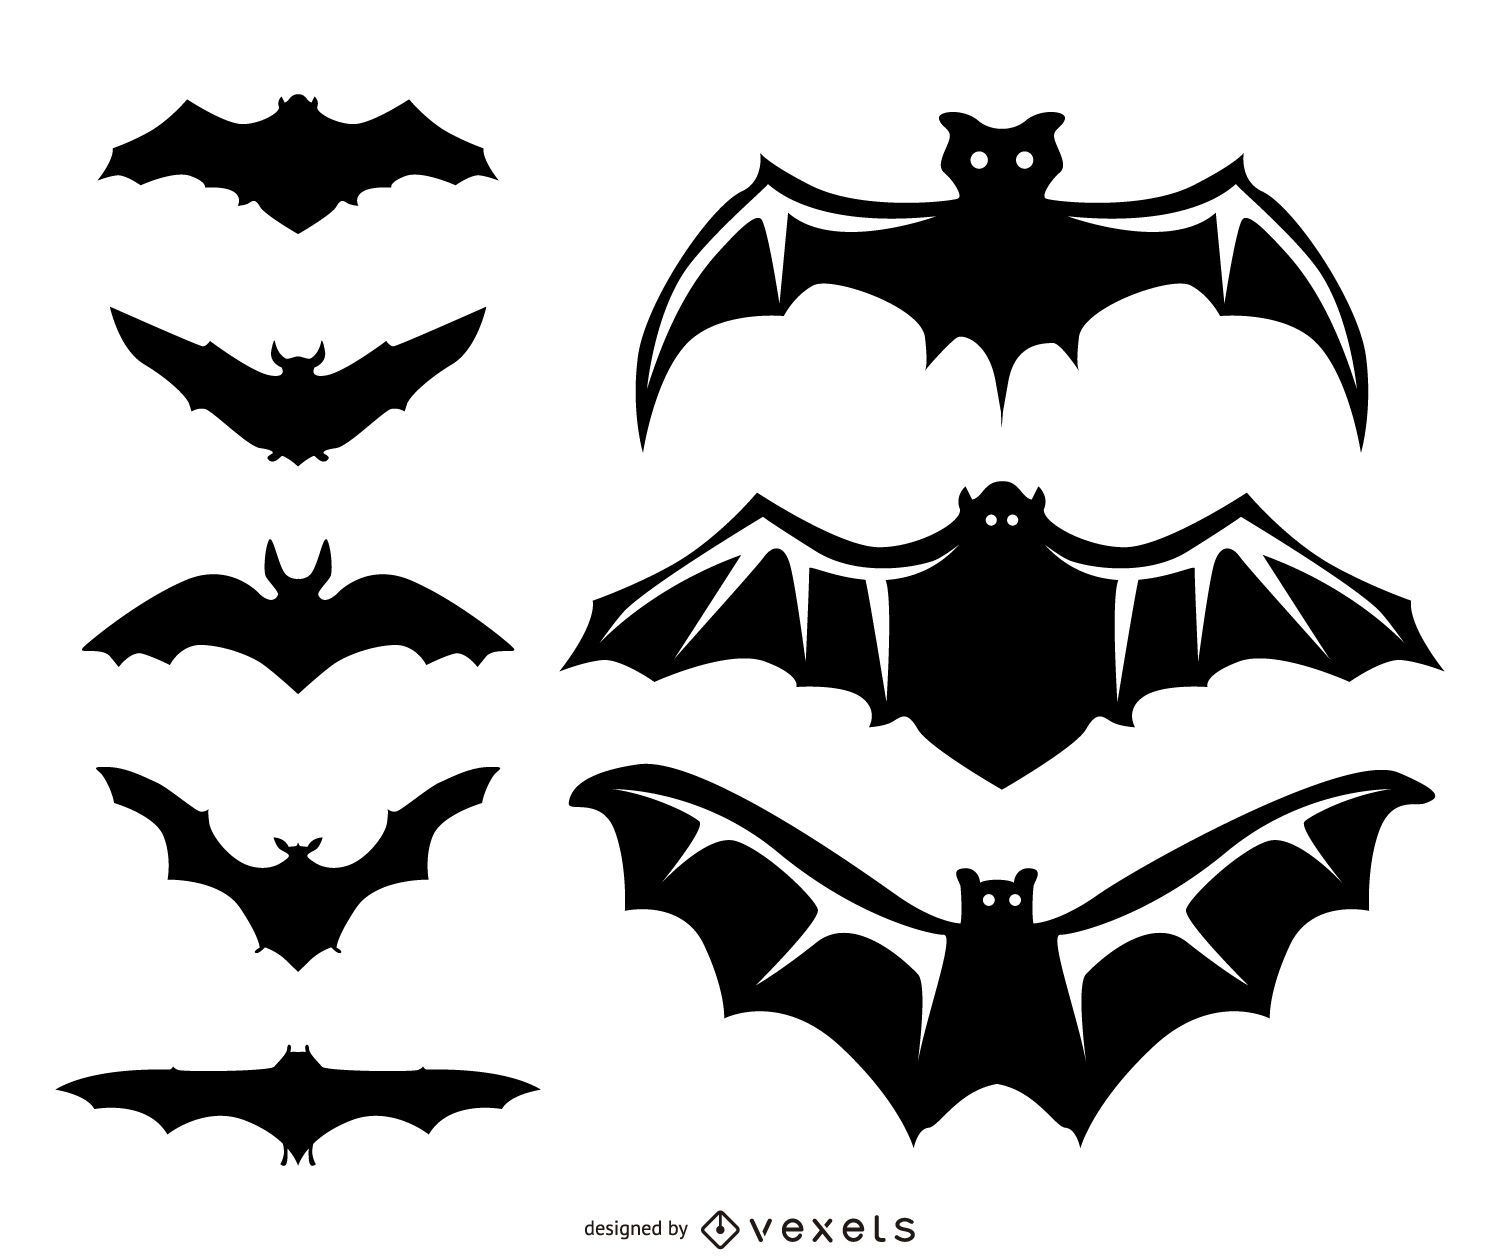 8 bat illustrations and silhouettes